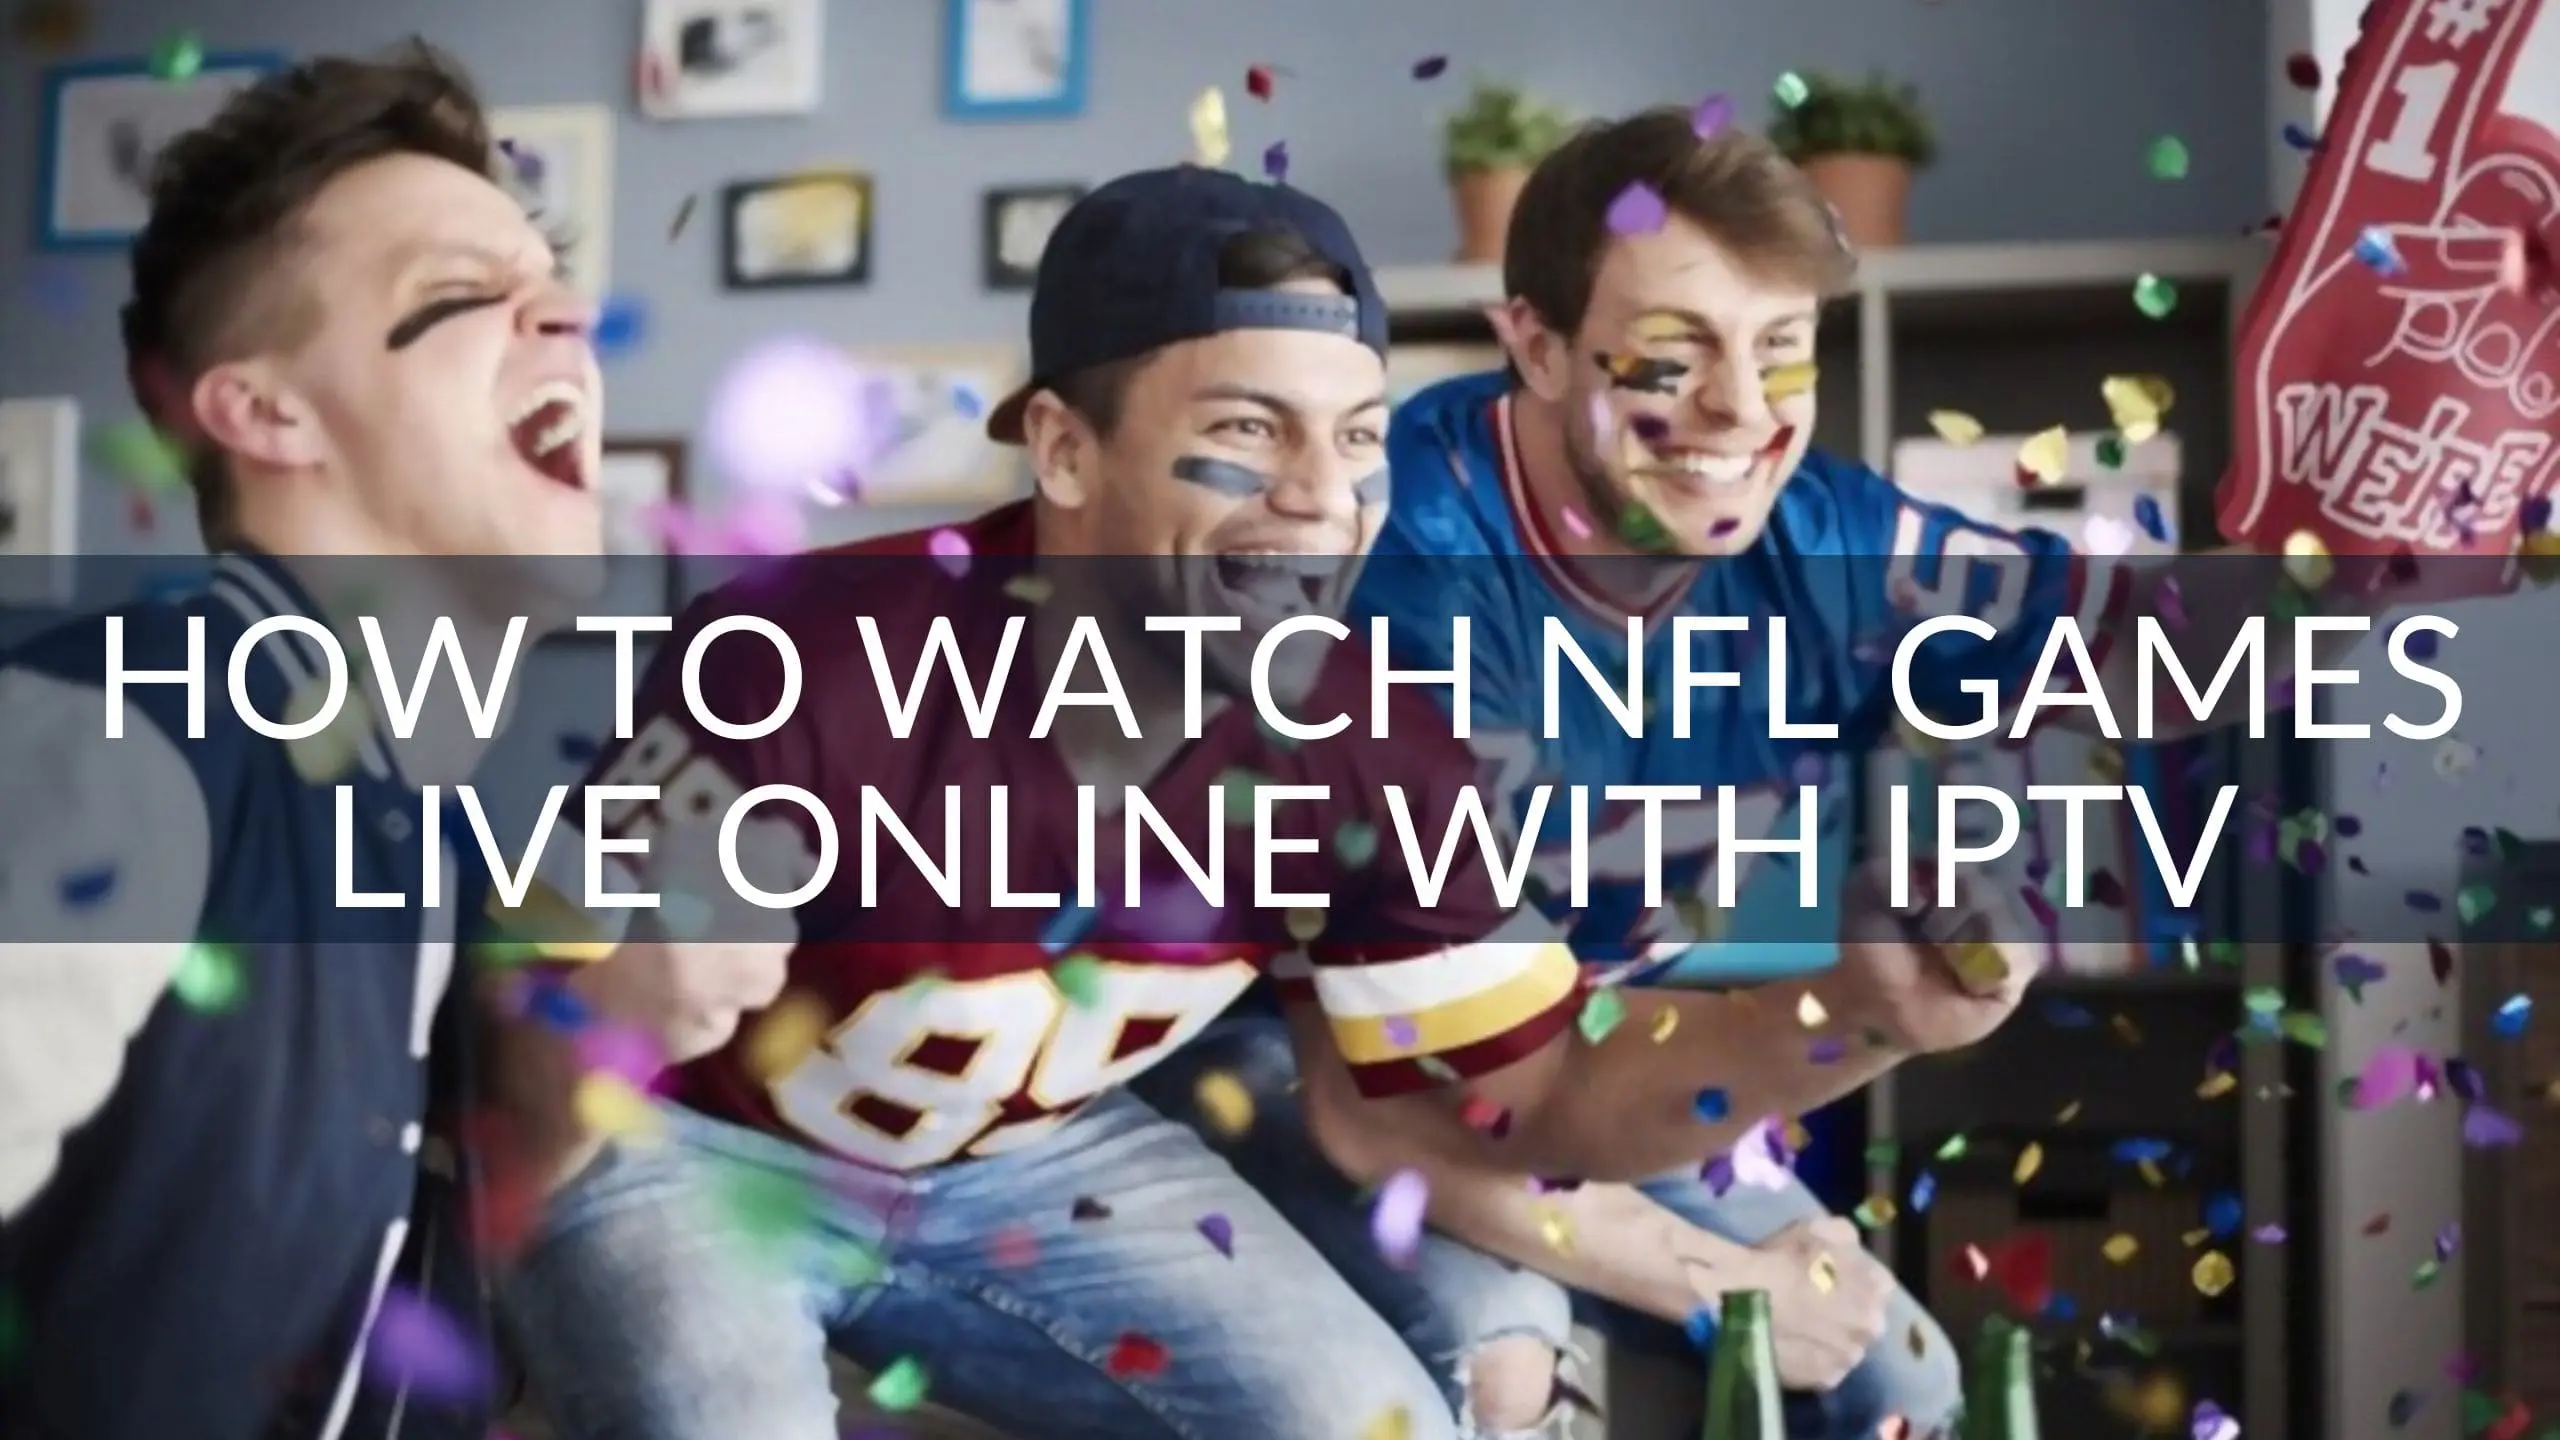 How to Watch NFL Games Live Online With IPTV